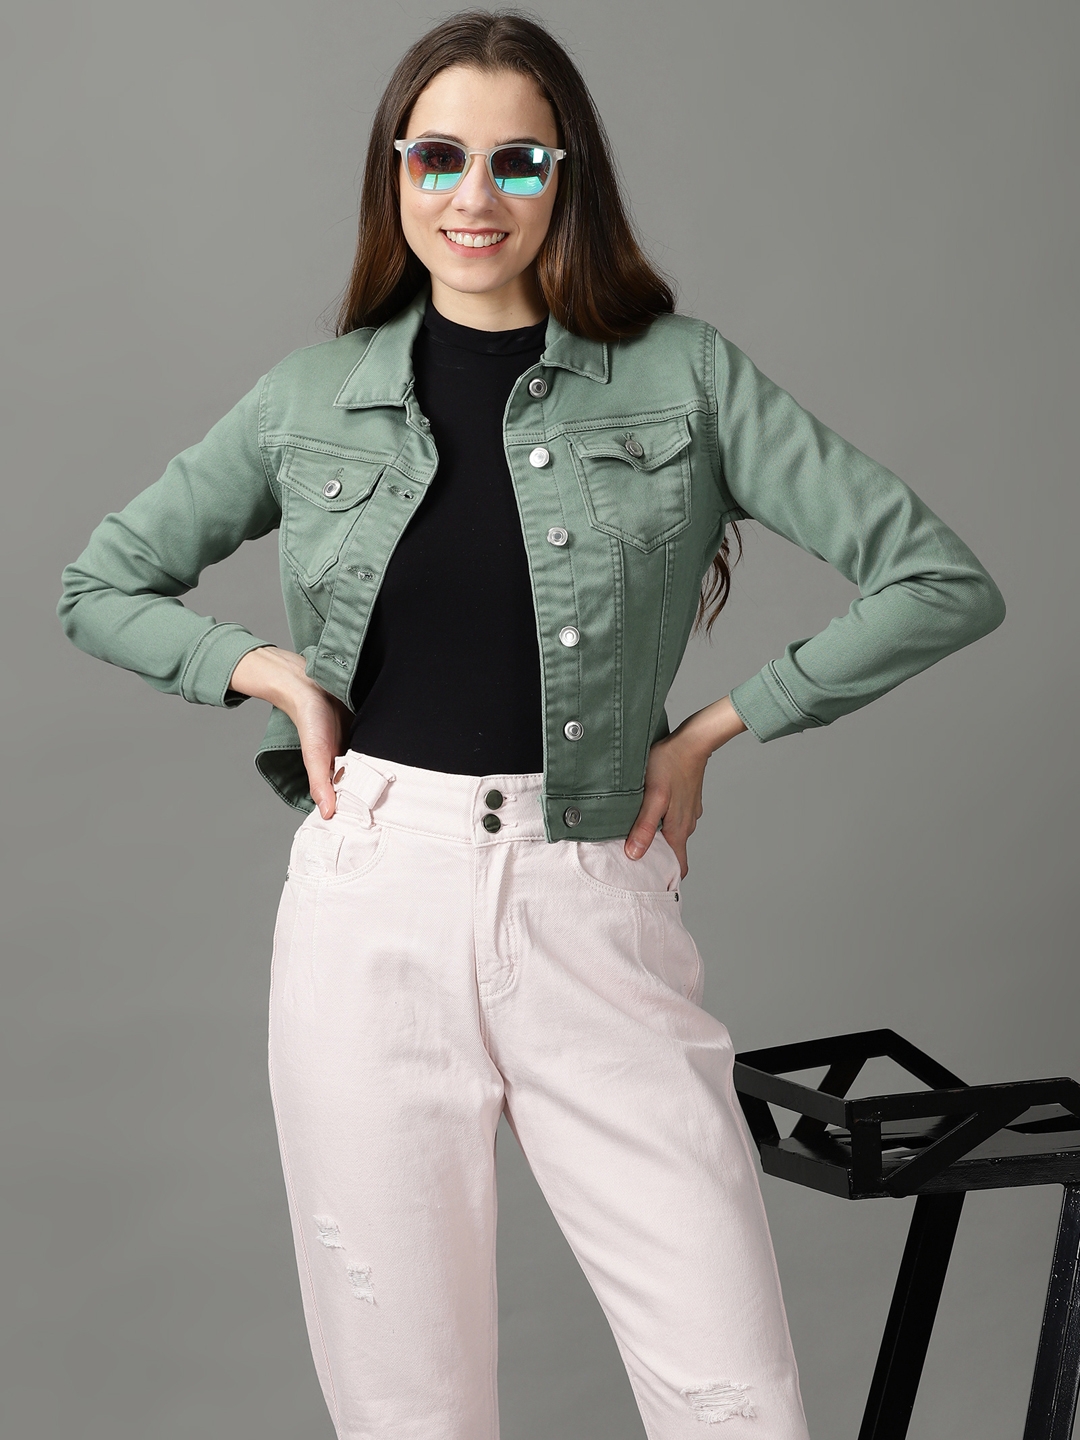 SHOWOFF Women's Spread Collar Solid Sea Green Open Front Jacket